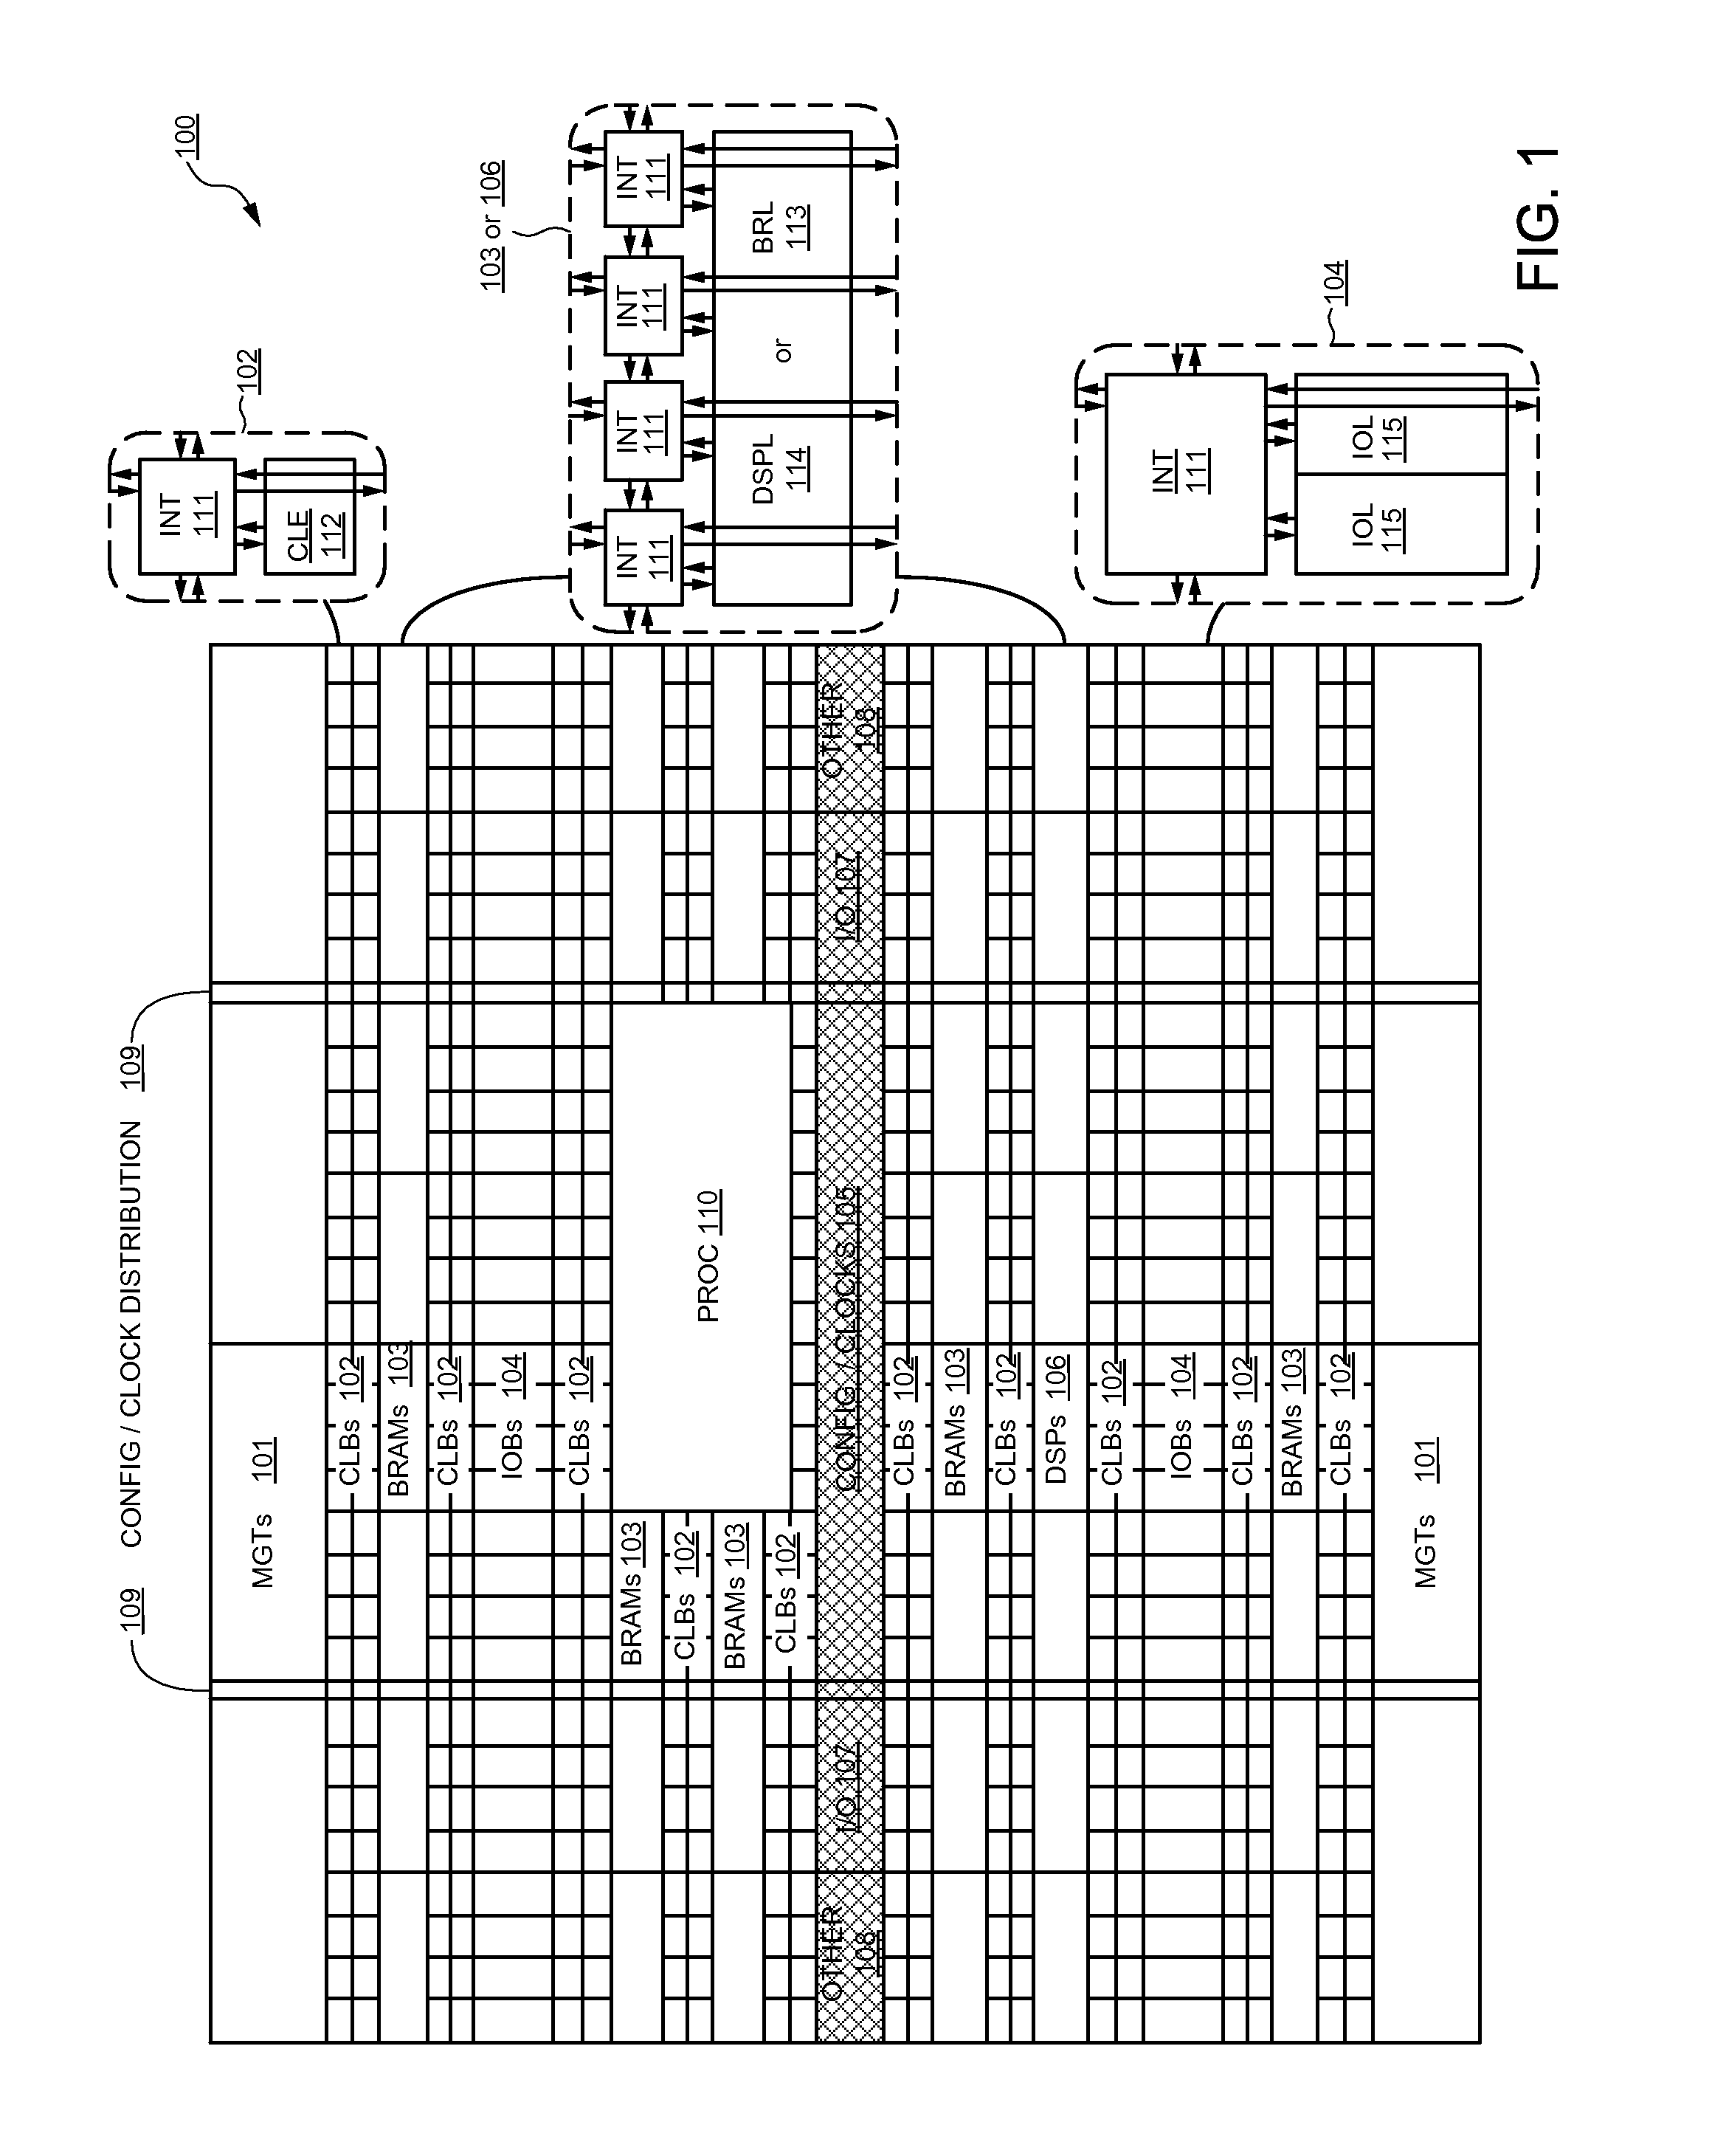 On-chip stuck-at fault detector and detection method